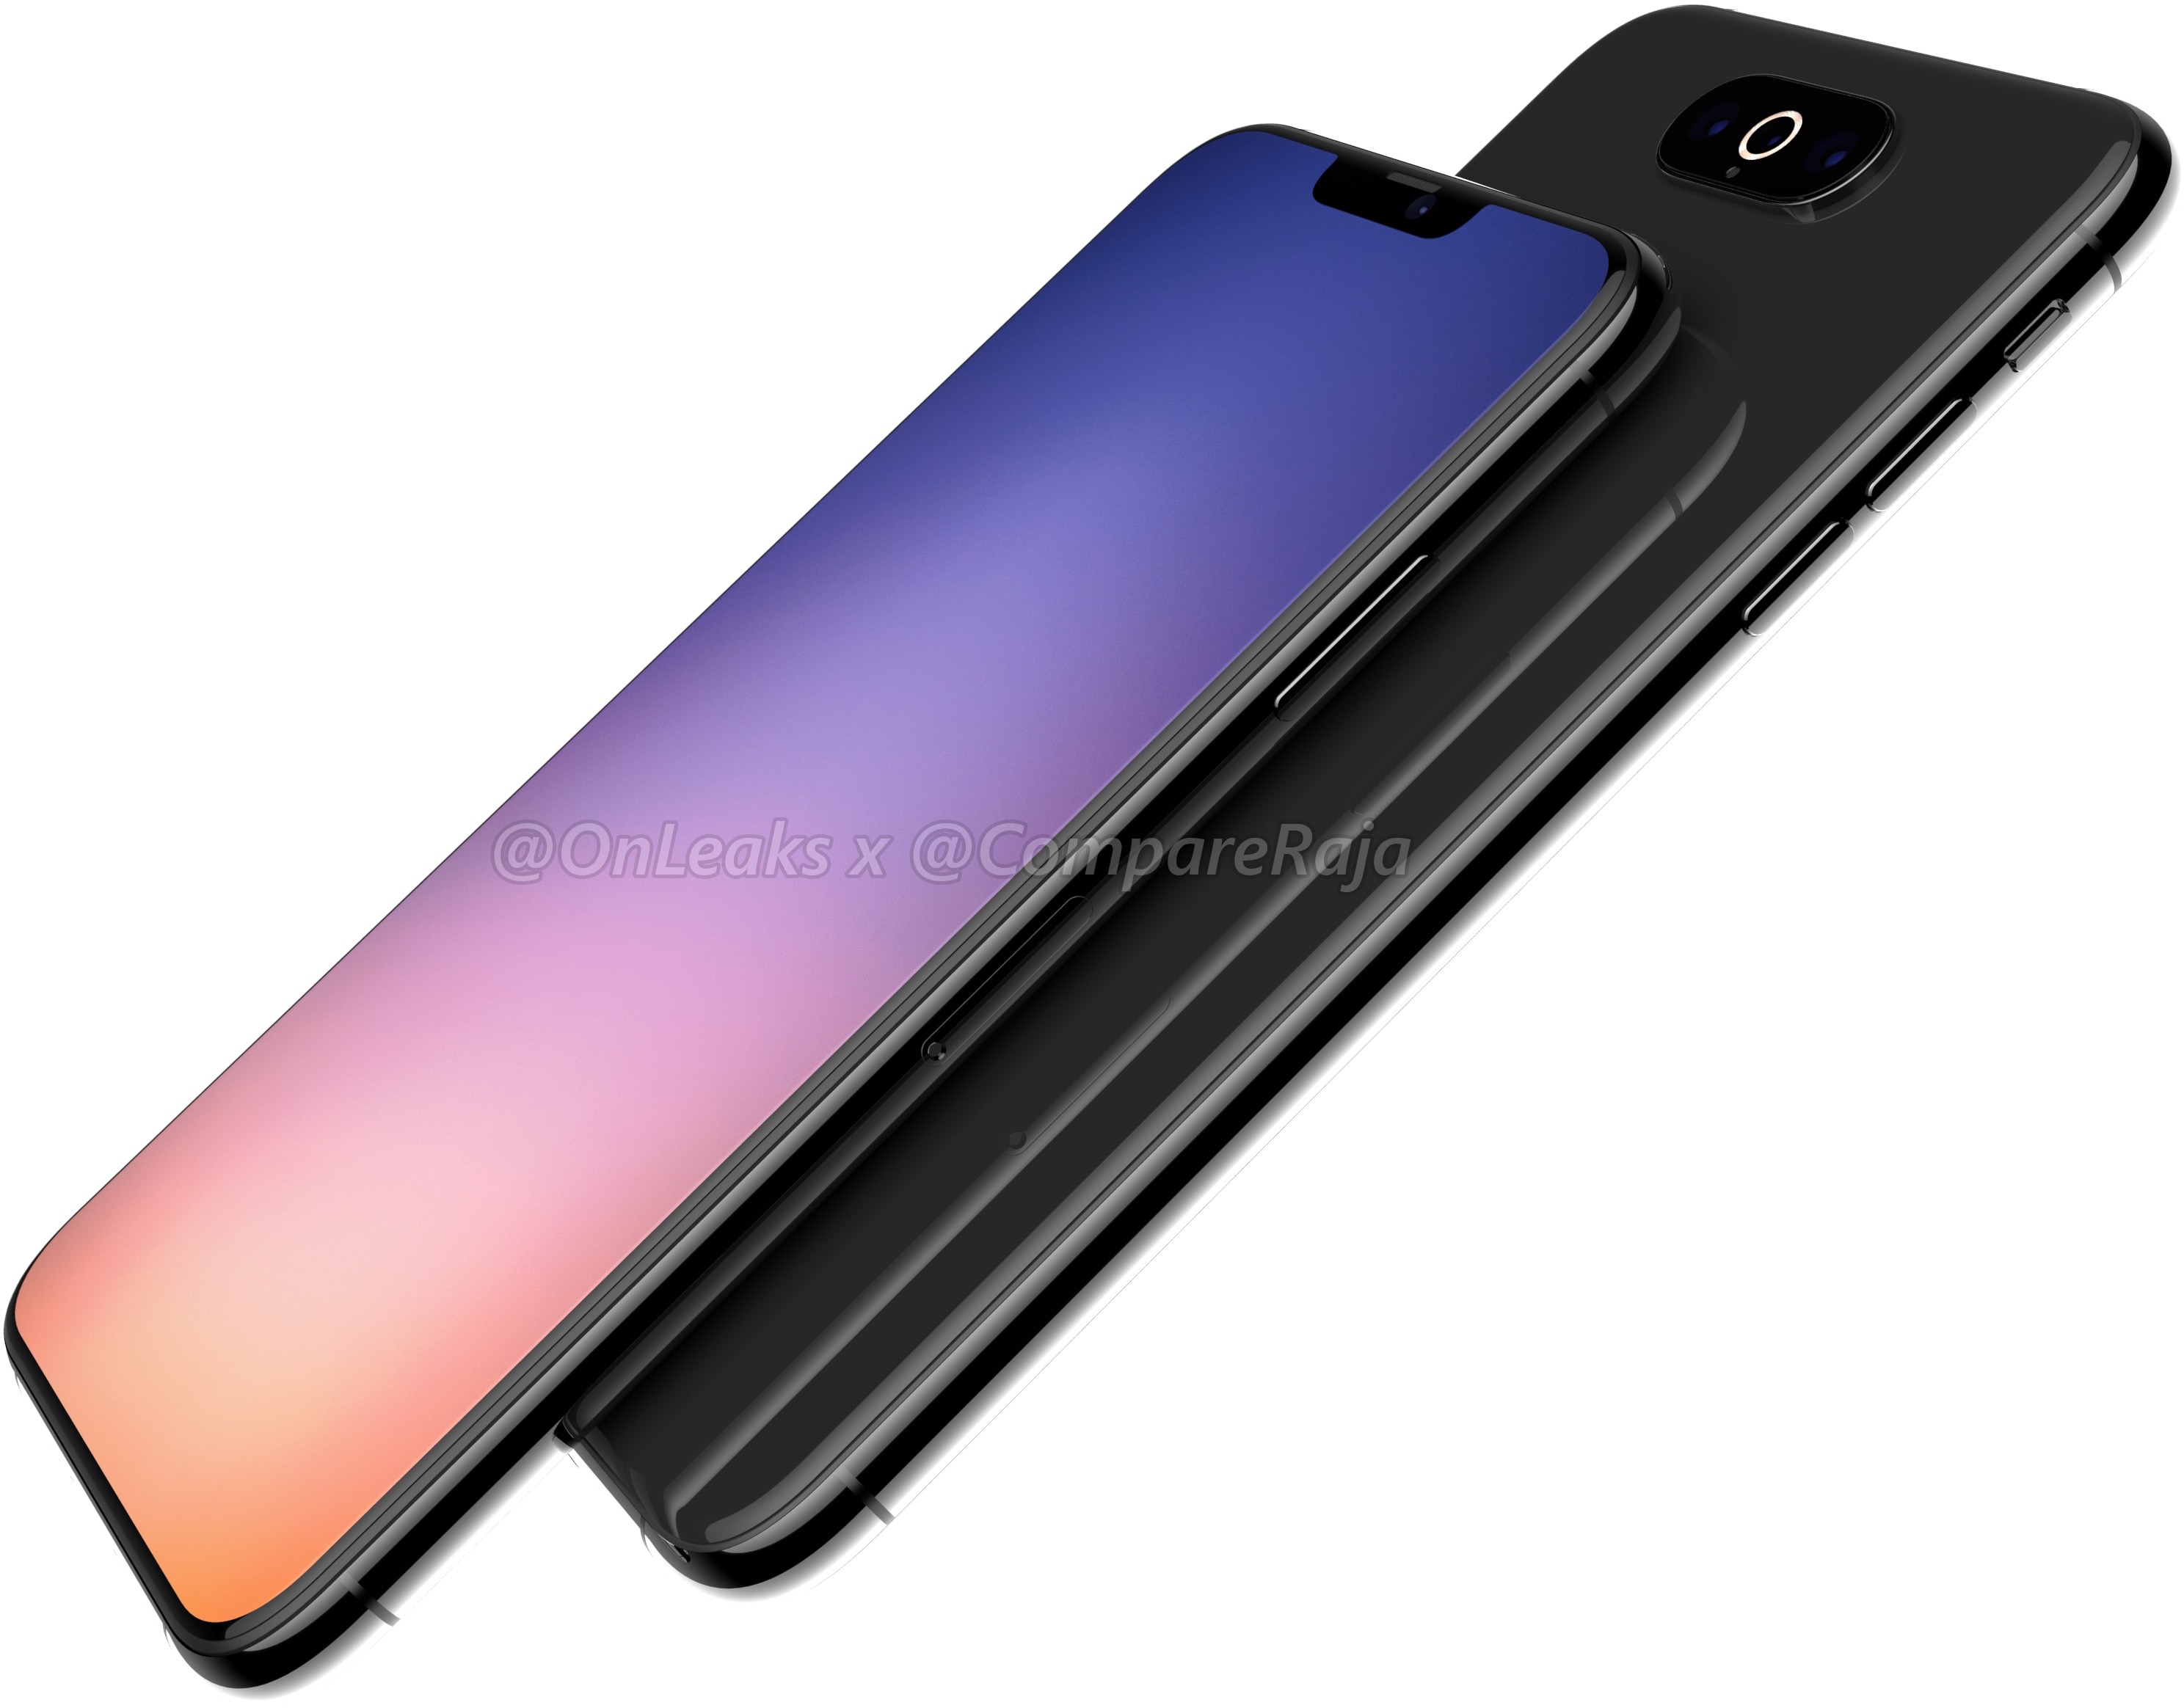 Render of a possible iPhone XS Max successor with three rear cameras